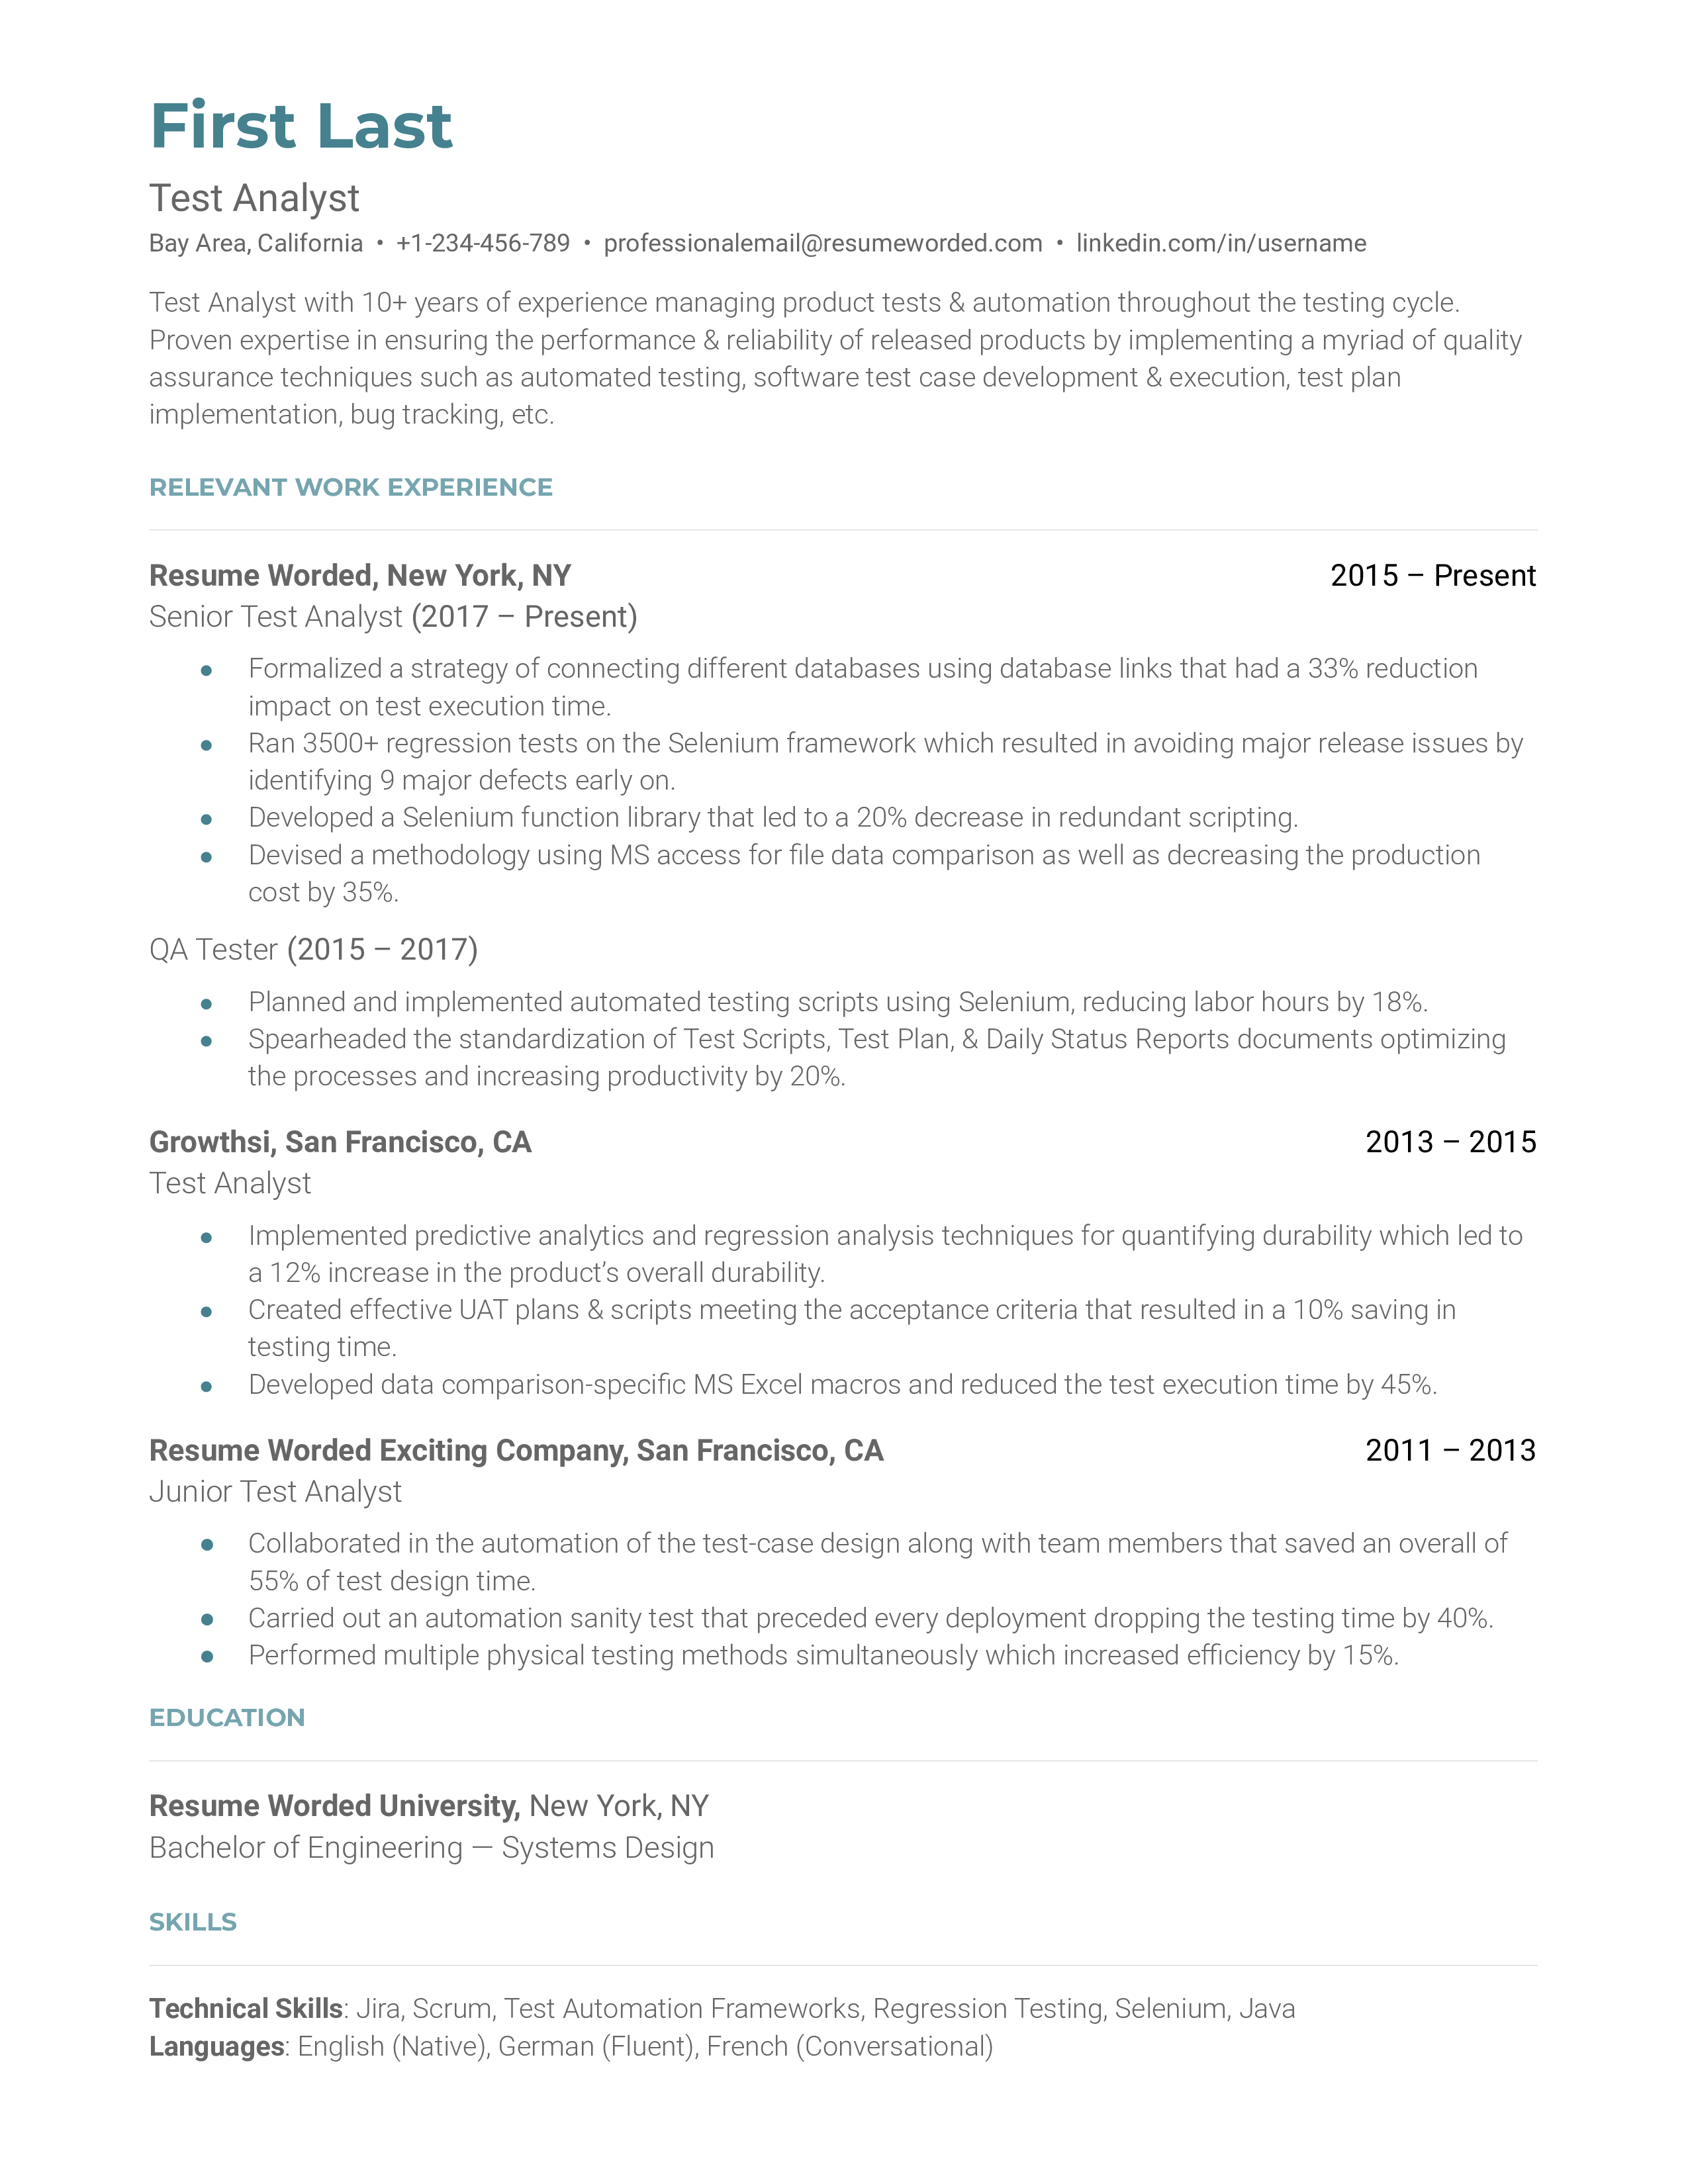 Test Analyst Resume Template + Example